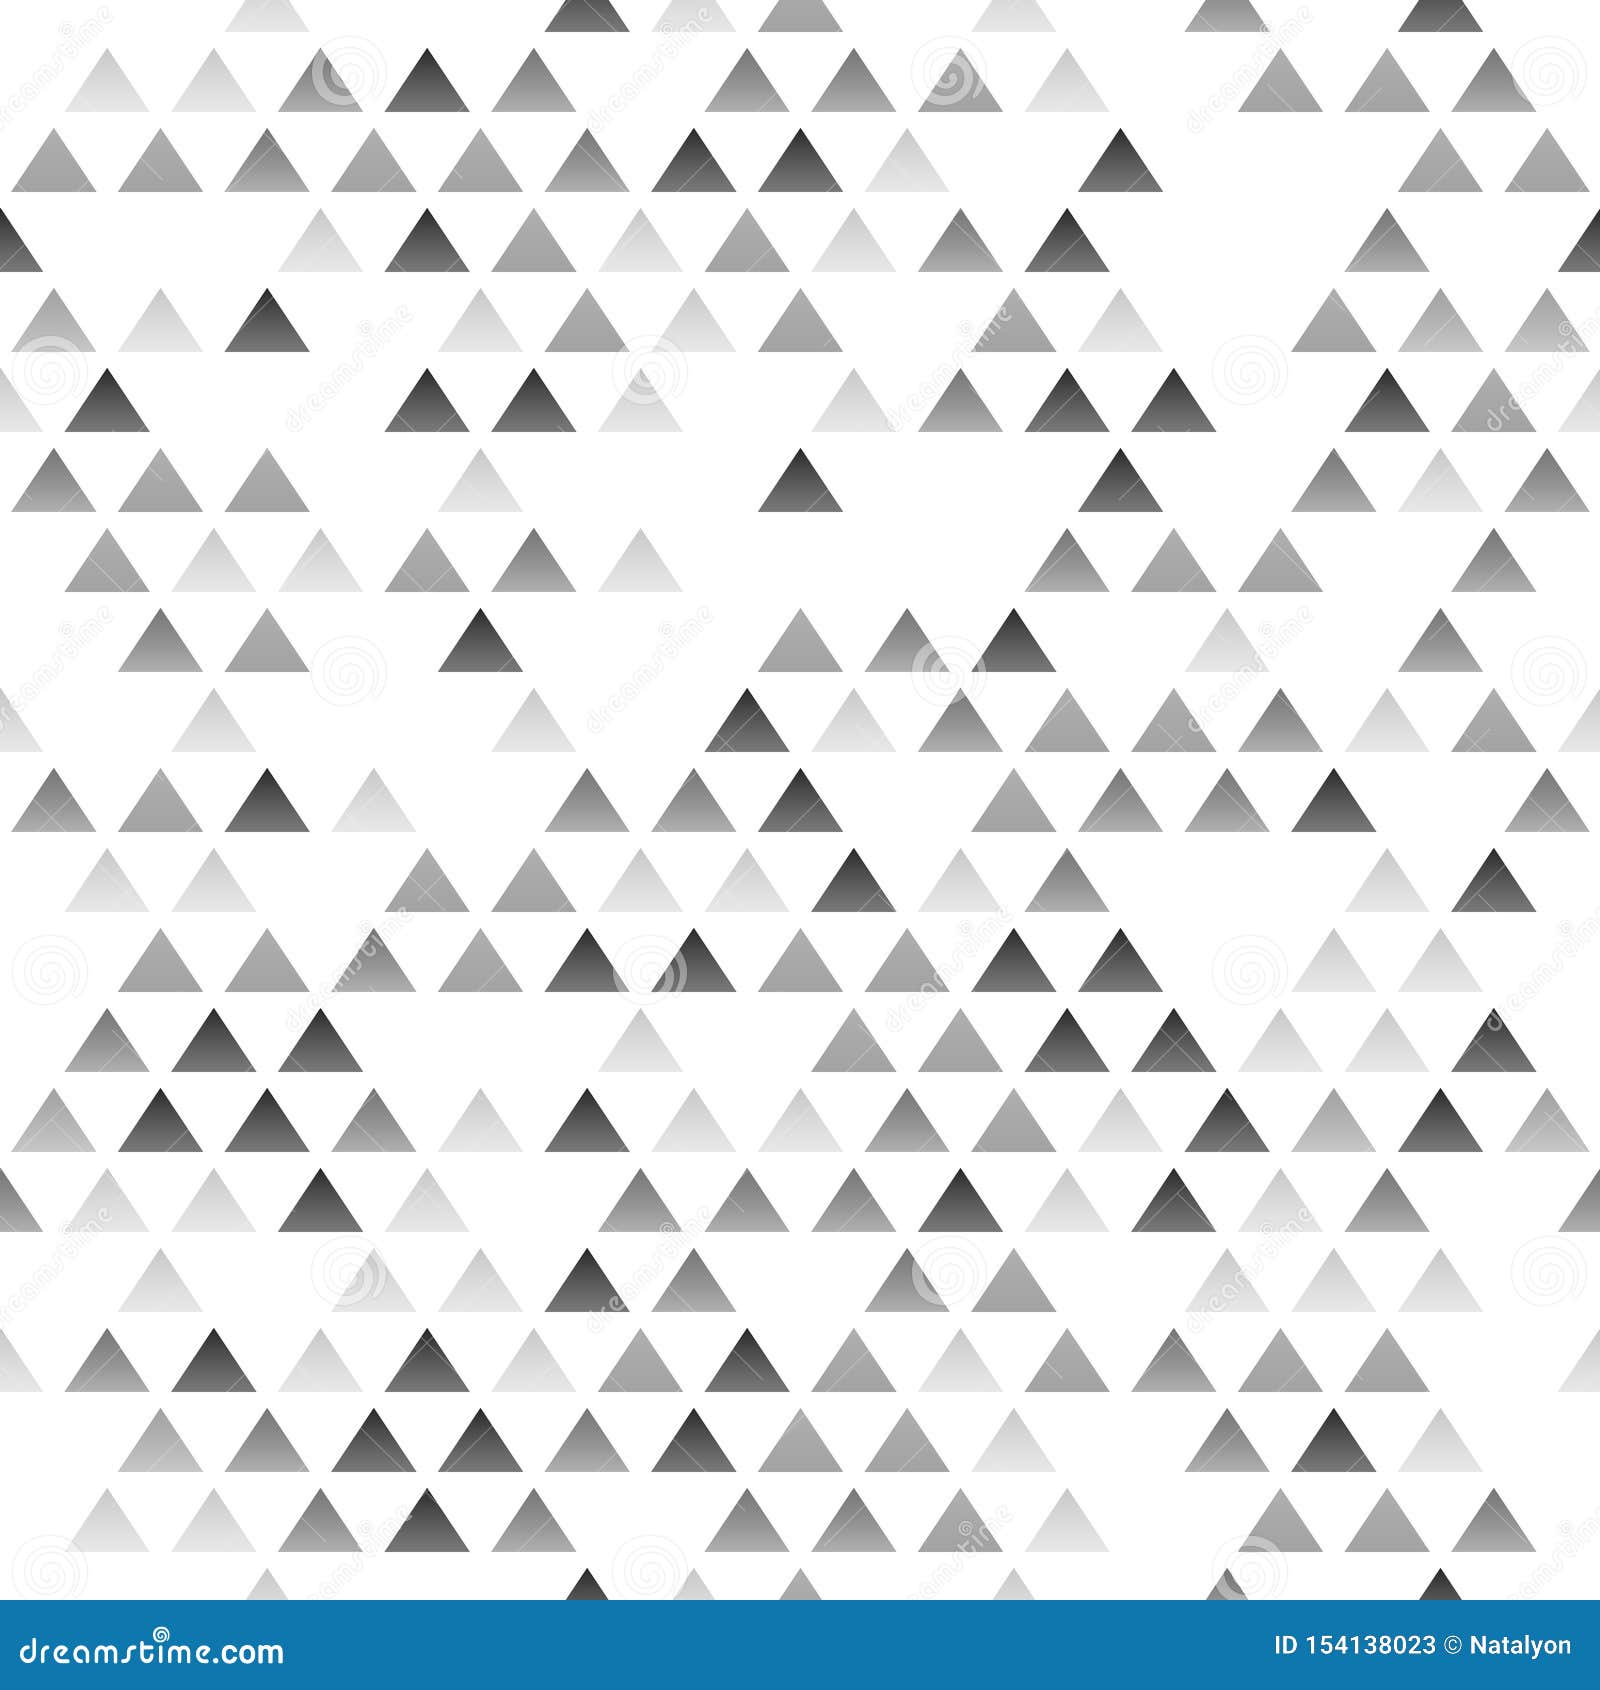 Simple Black and White Gradient Geometric Triangles Seamless Pattern ...